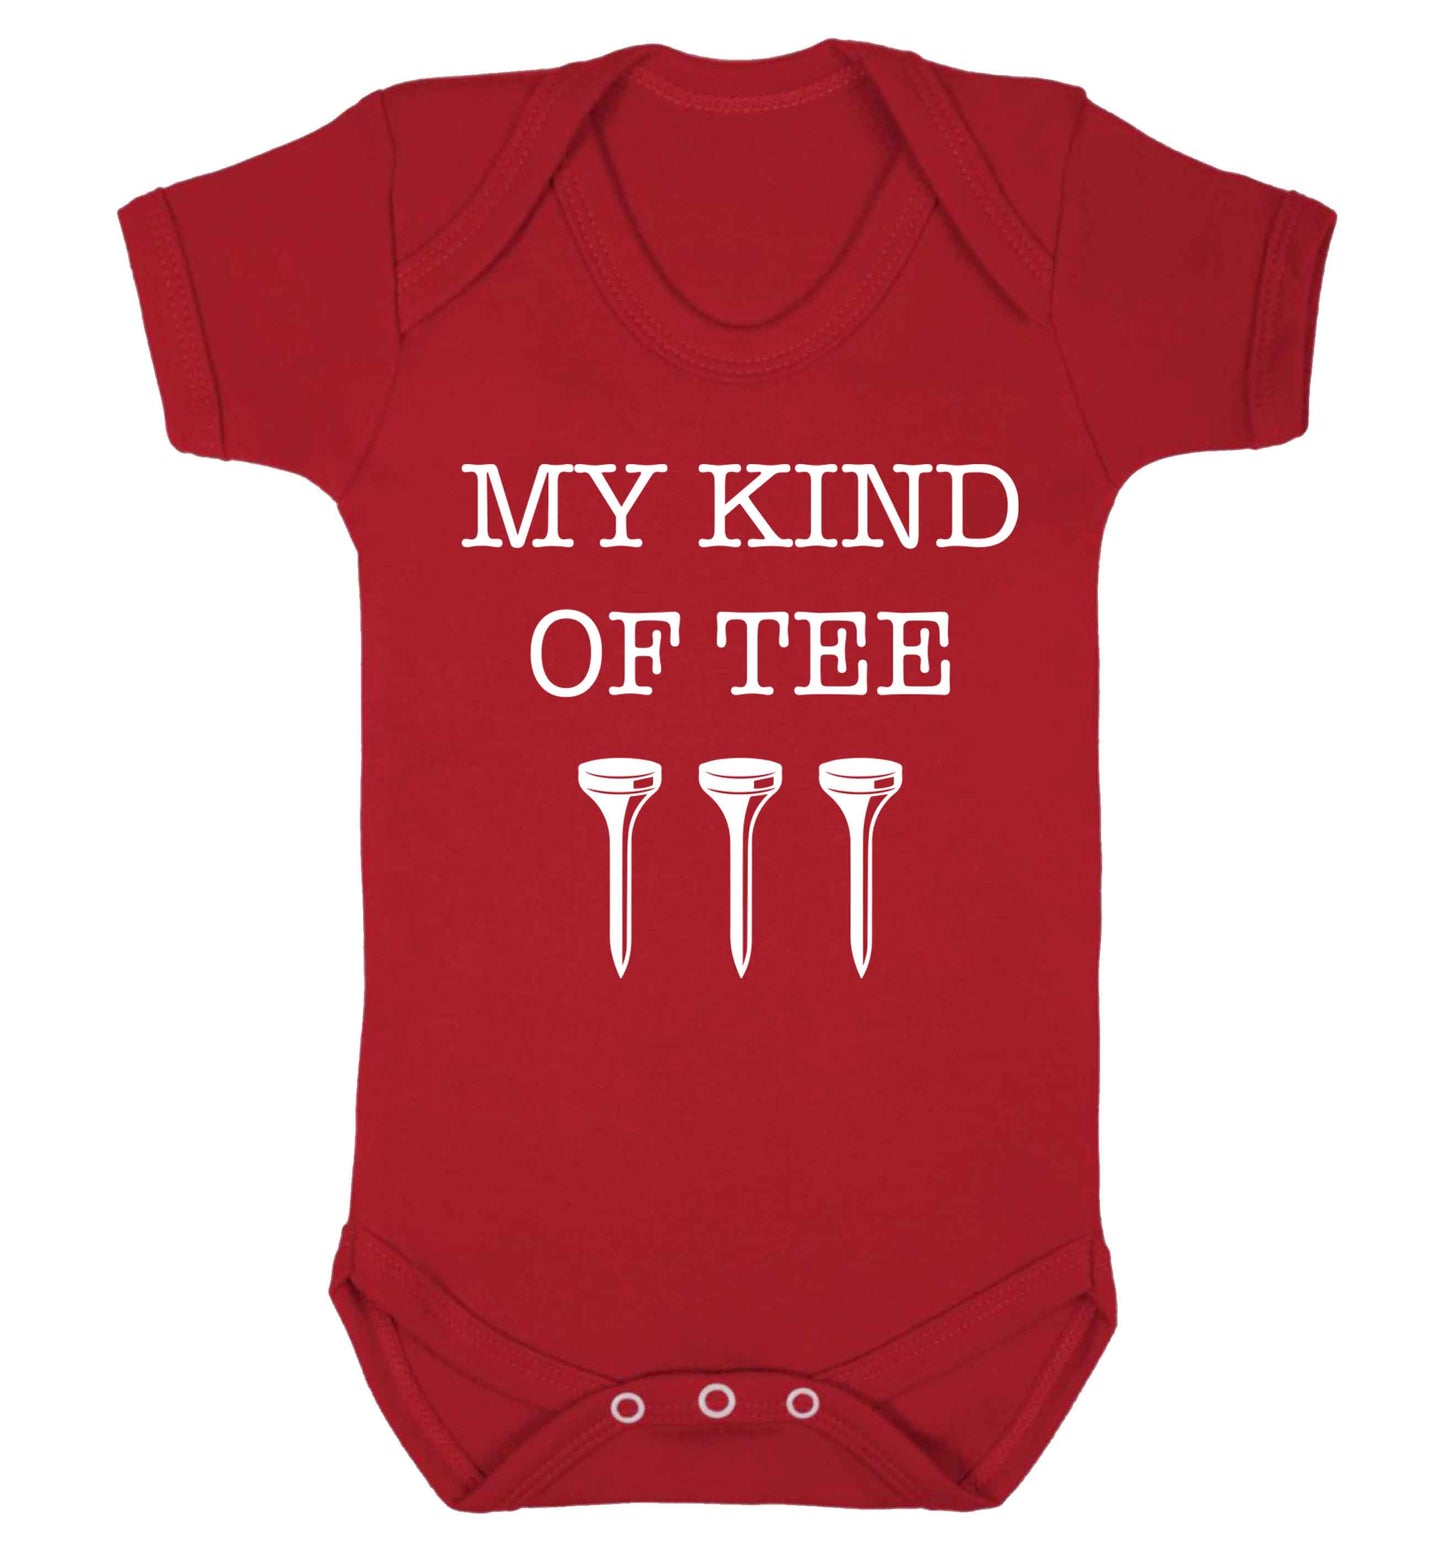 My kind of tee Baby Vest red 18-24 months